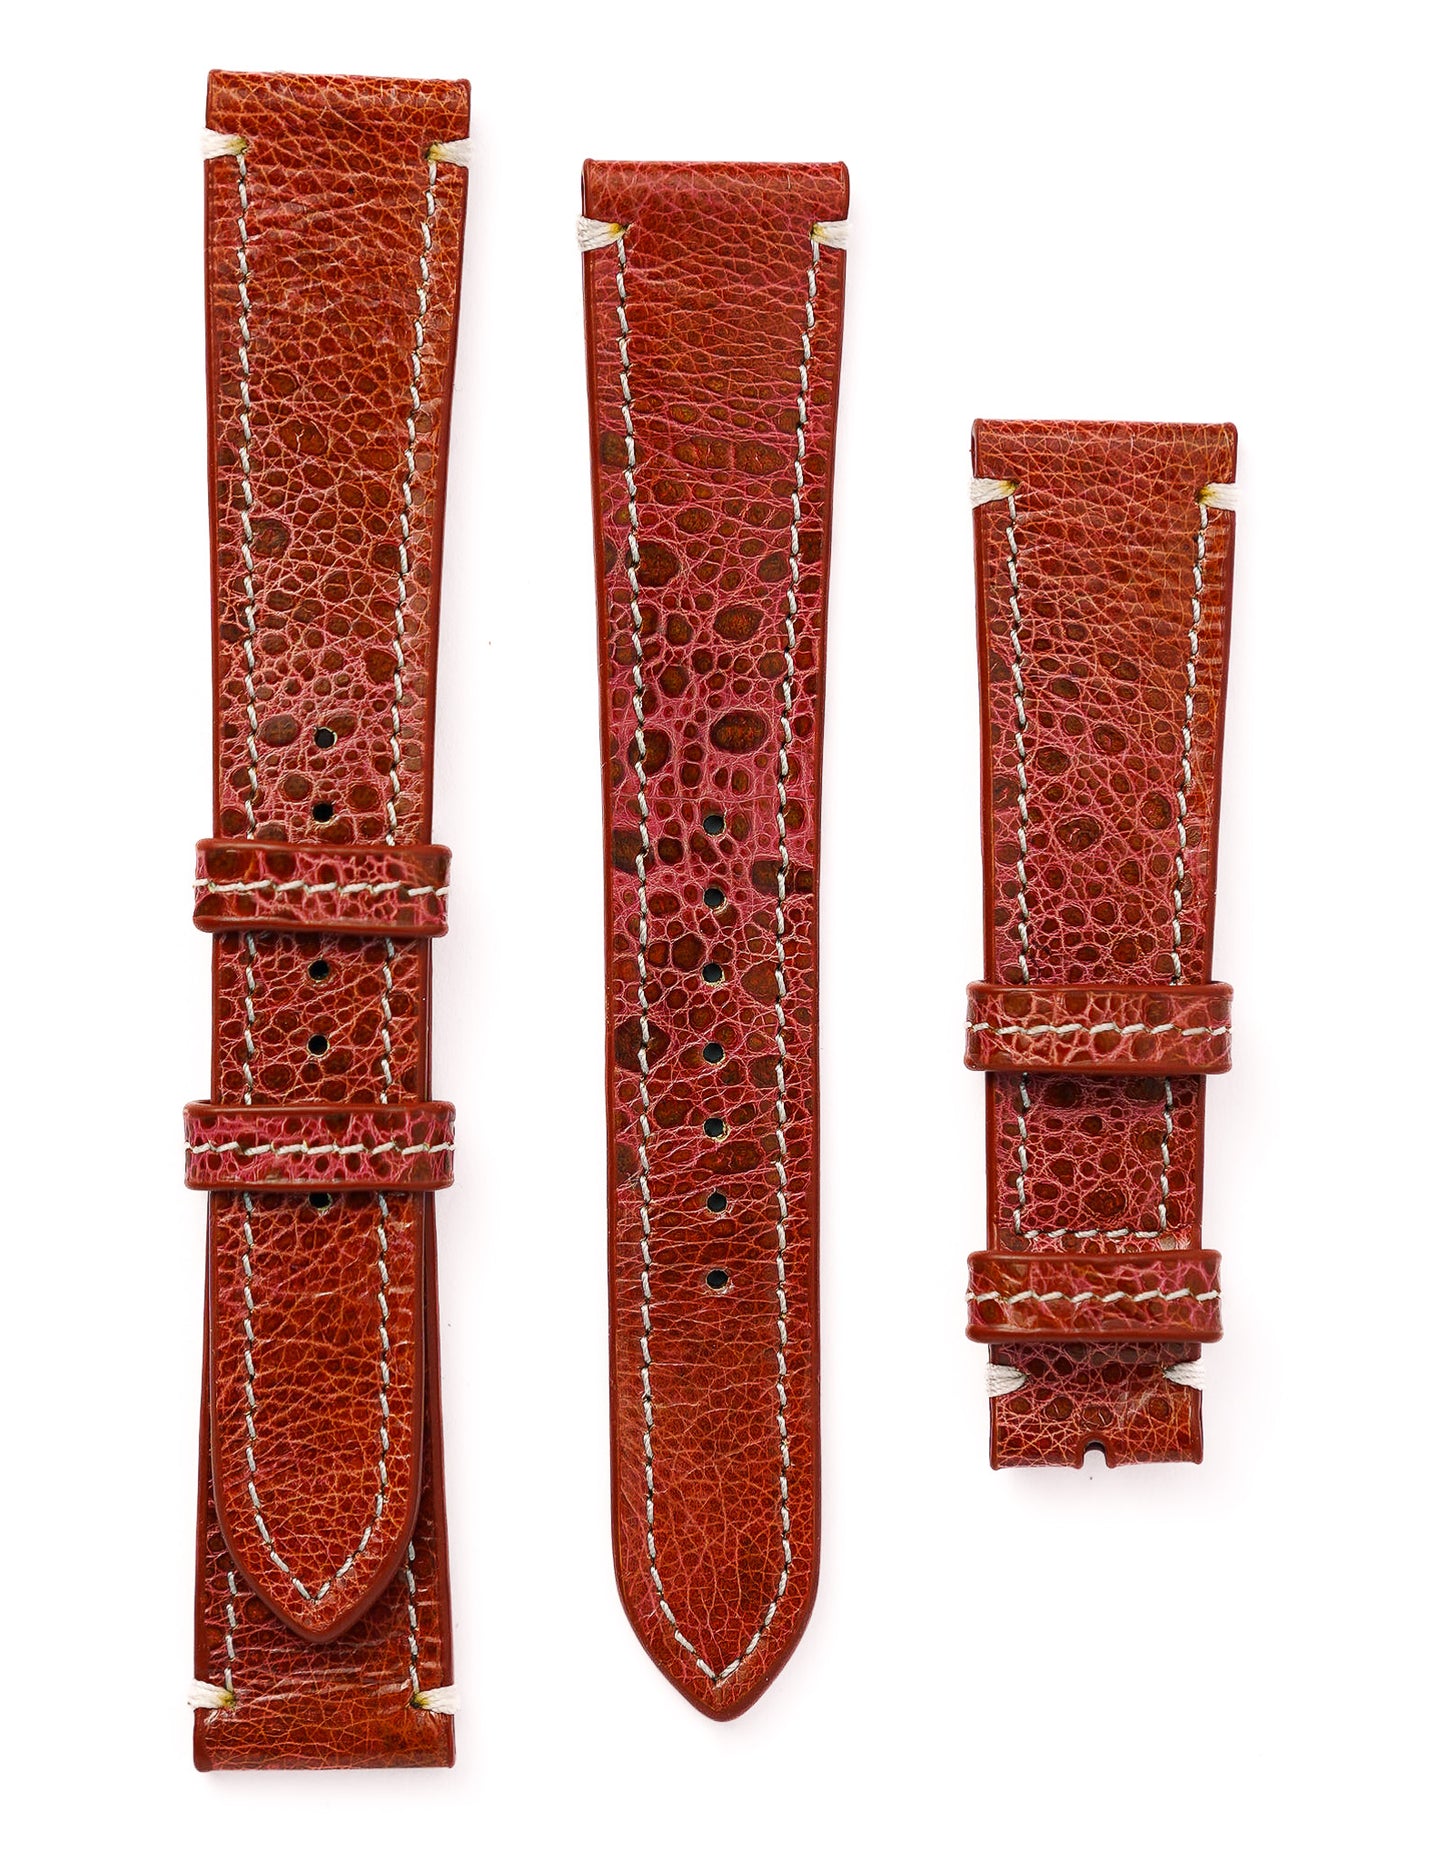 Cane Toad Leather Watch Strap - Redy Tan